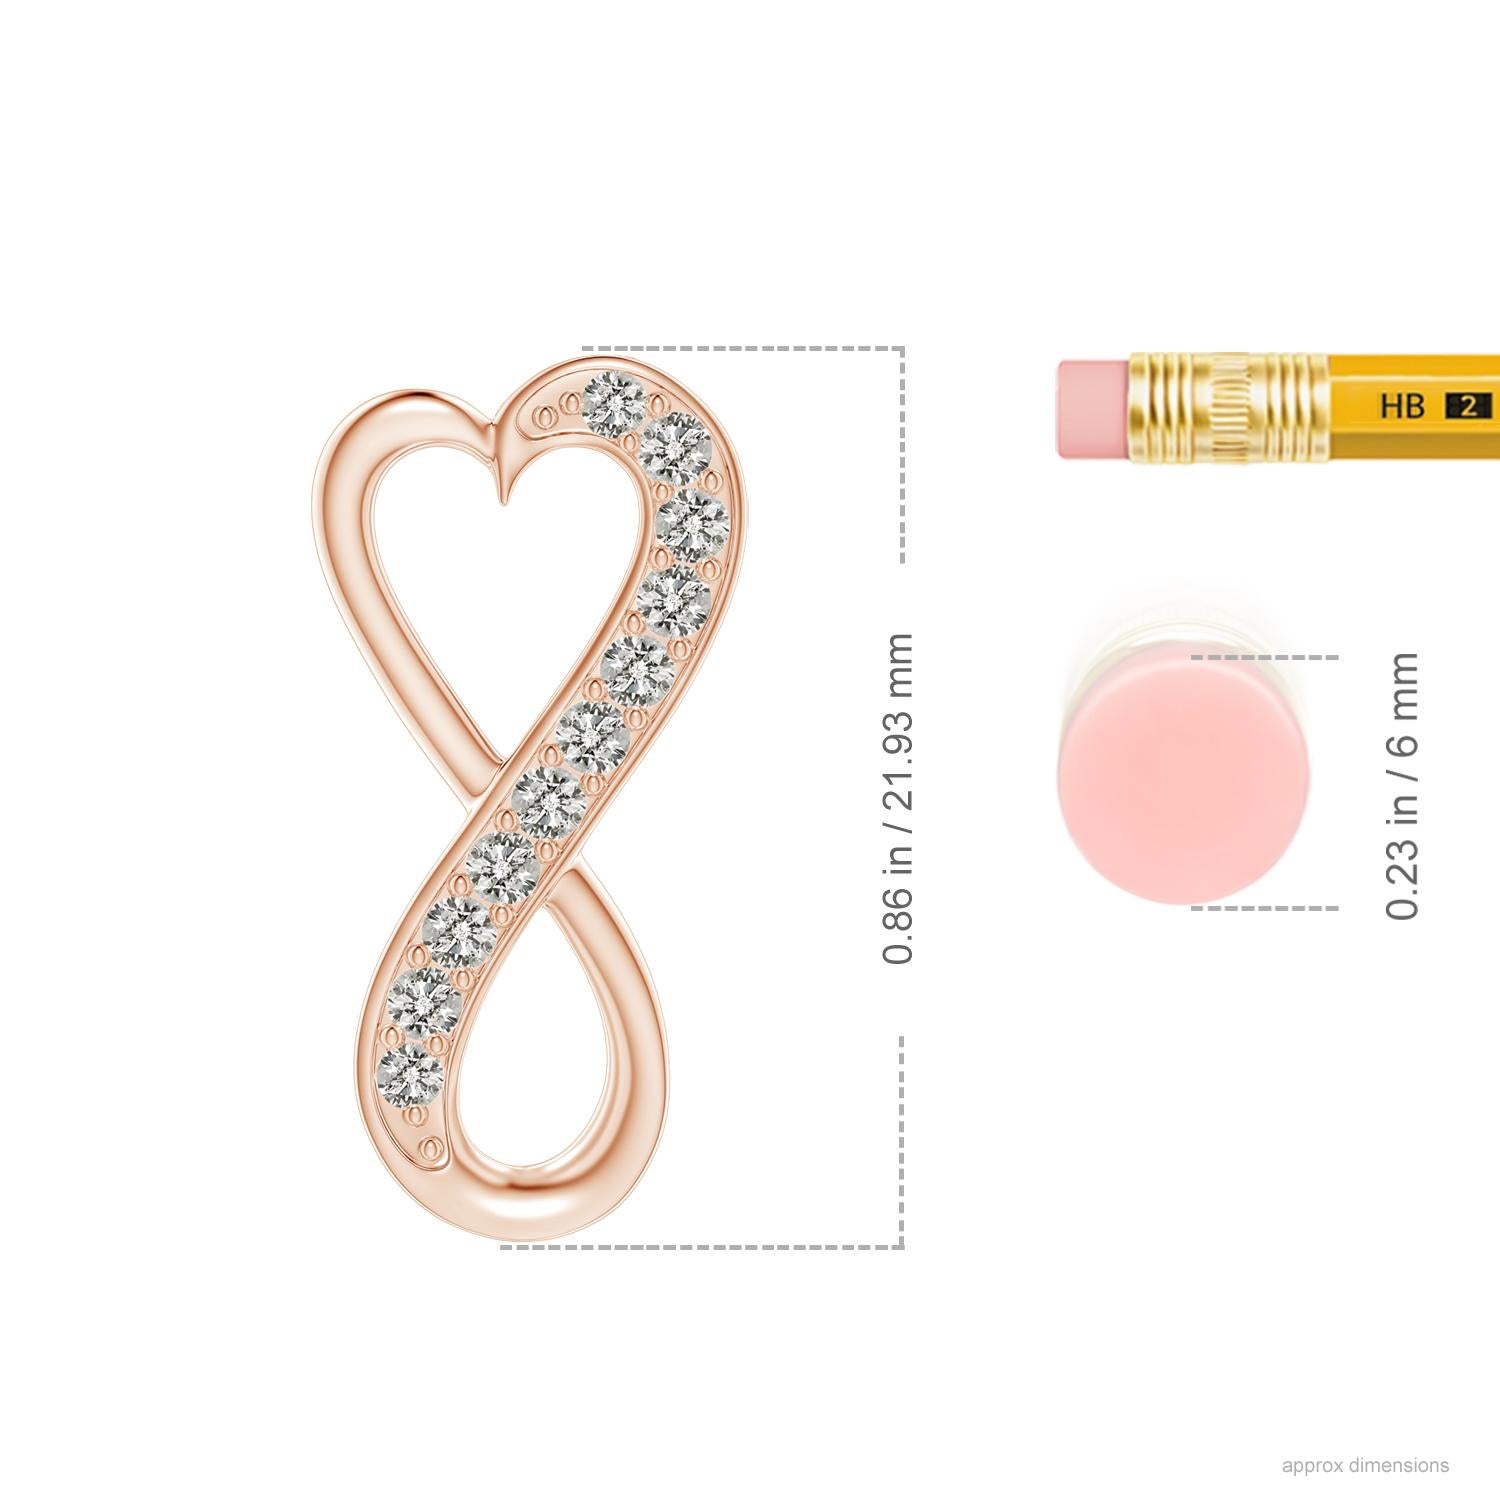 Designed with a hidden bale, this contemporary pendant features a heart frame that extends to form a stunning infinity. Shimmering diamonds partially accentuate the curves of this infinity heart pendant. It is skillfully crafted in 14k rose